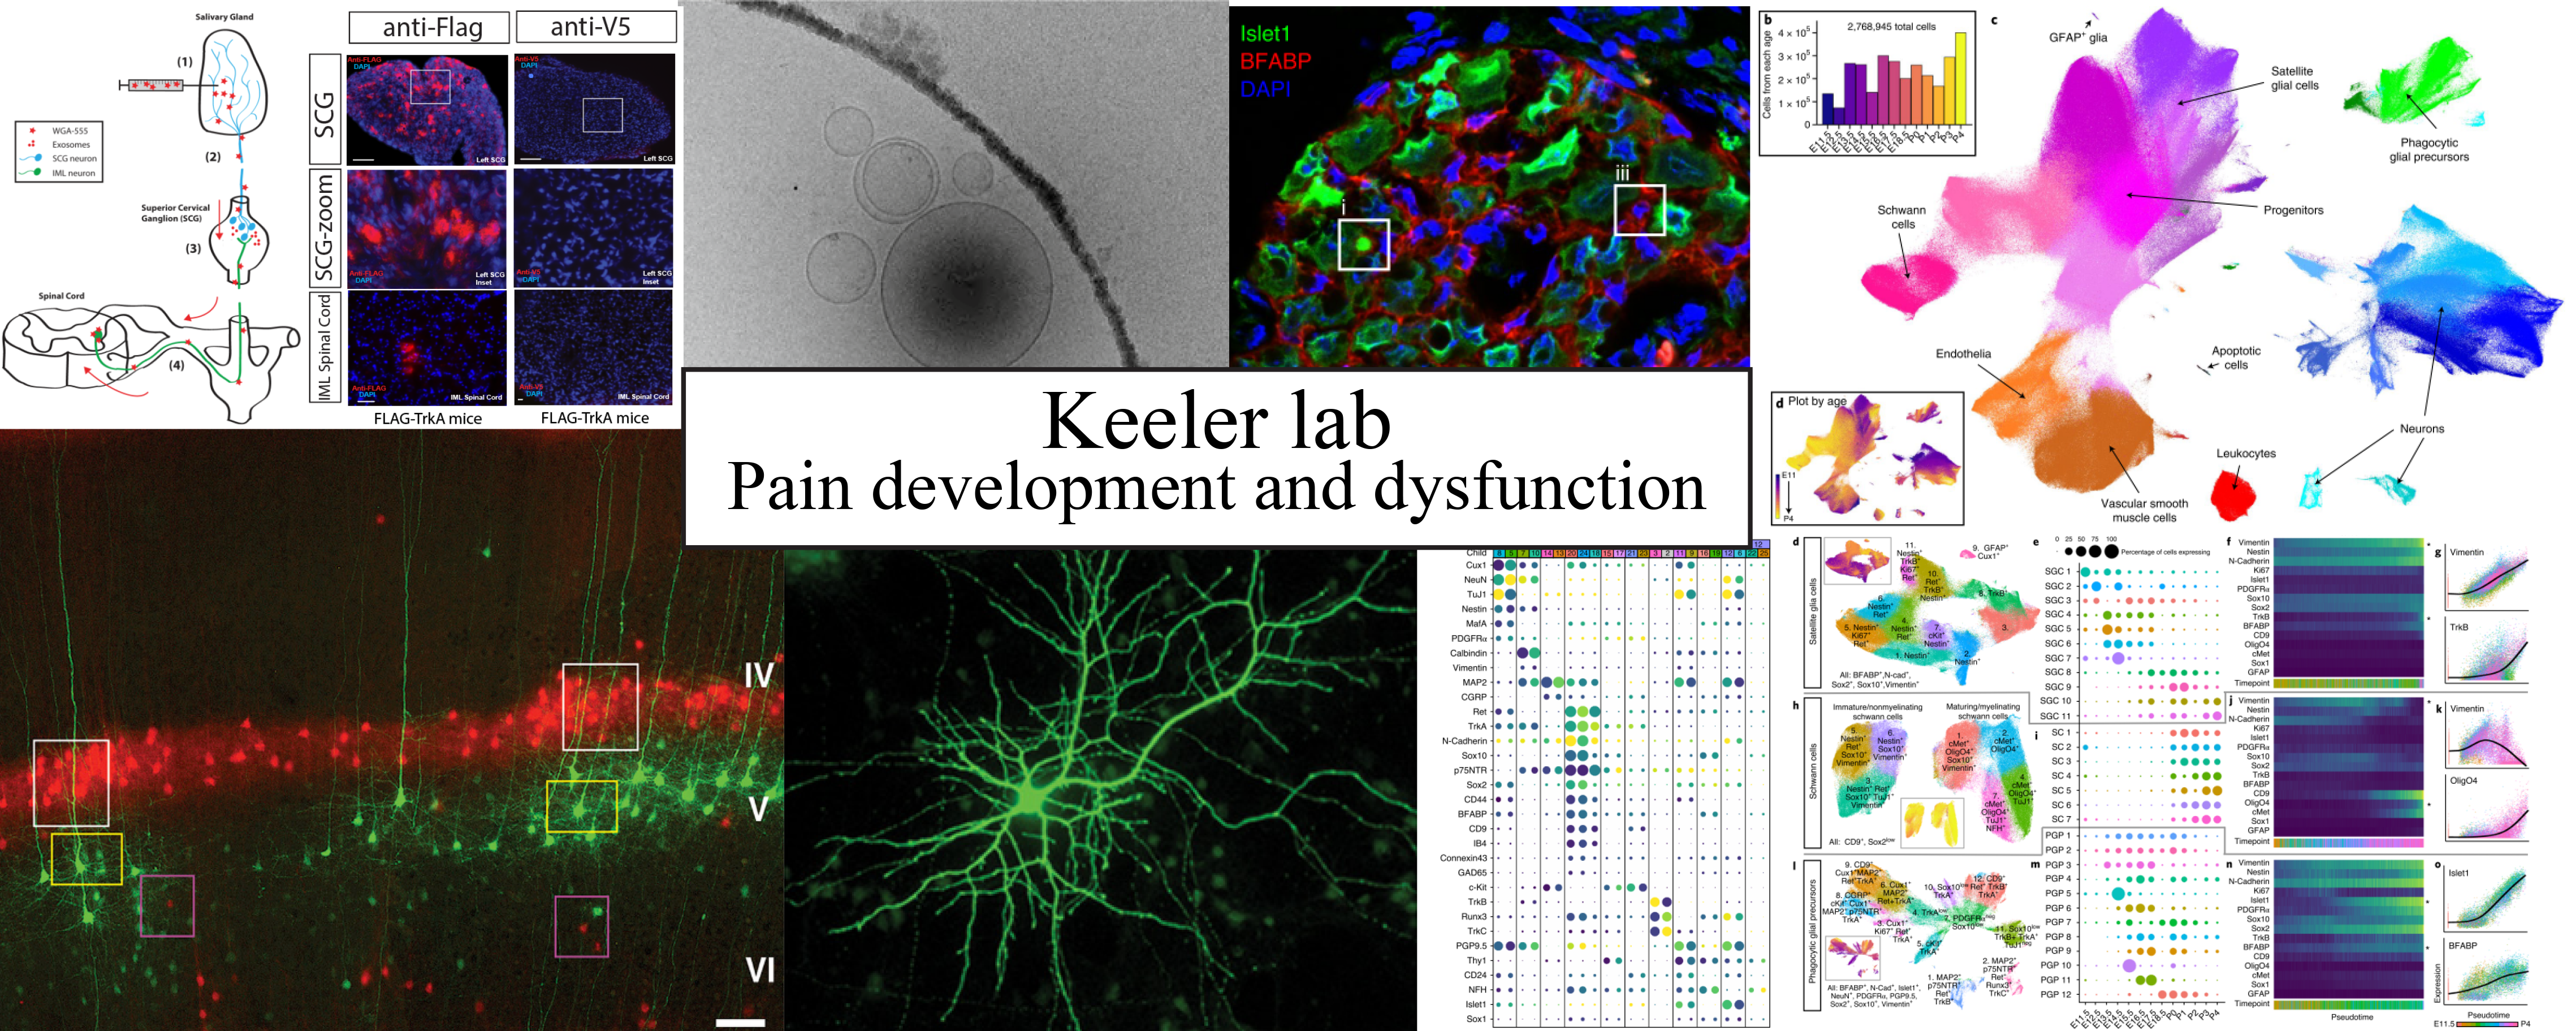 Keeler lab - pain development and dysfunction. Images from previous work.